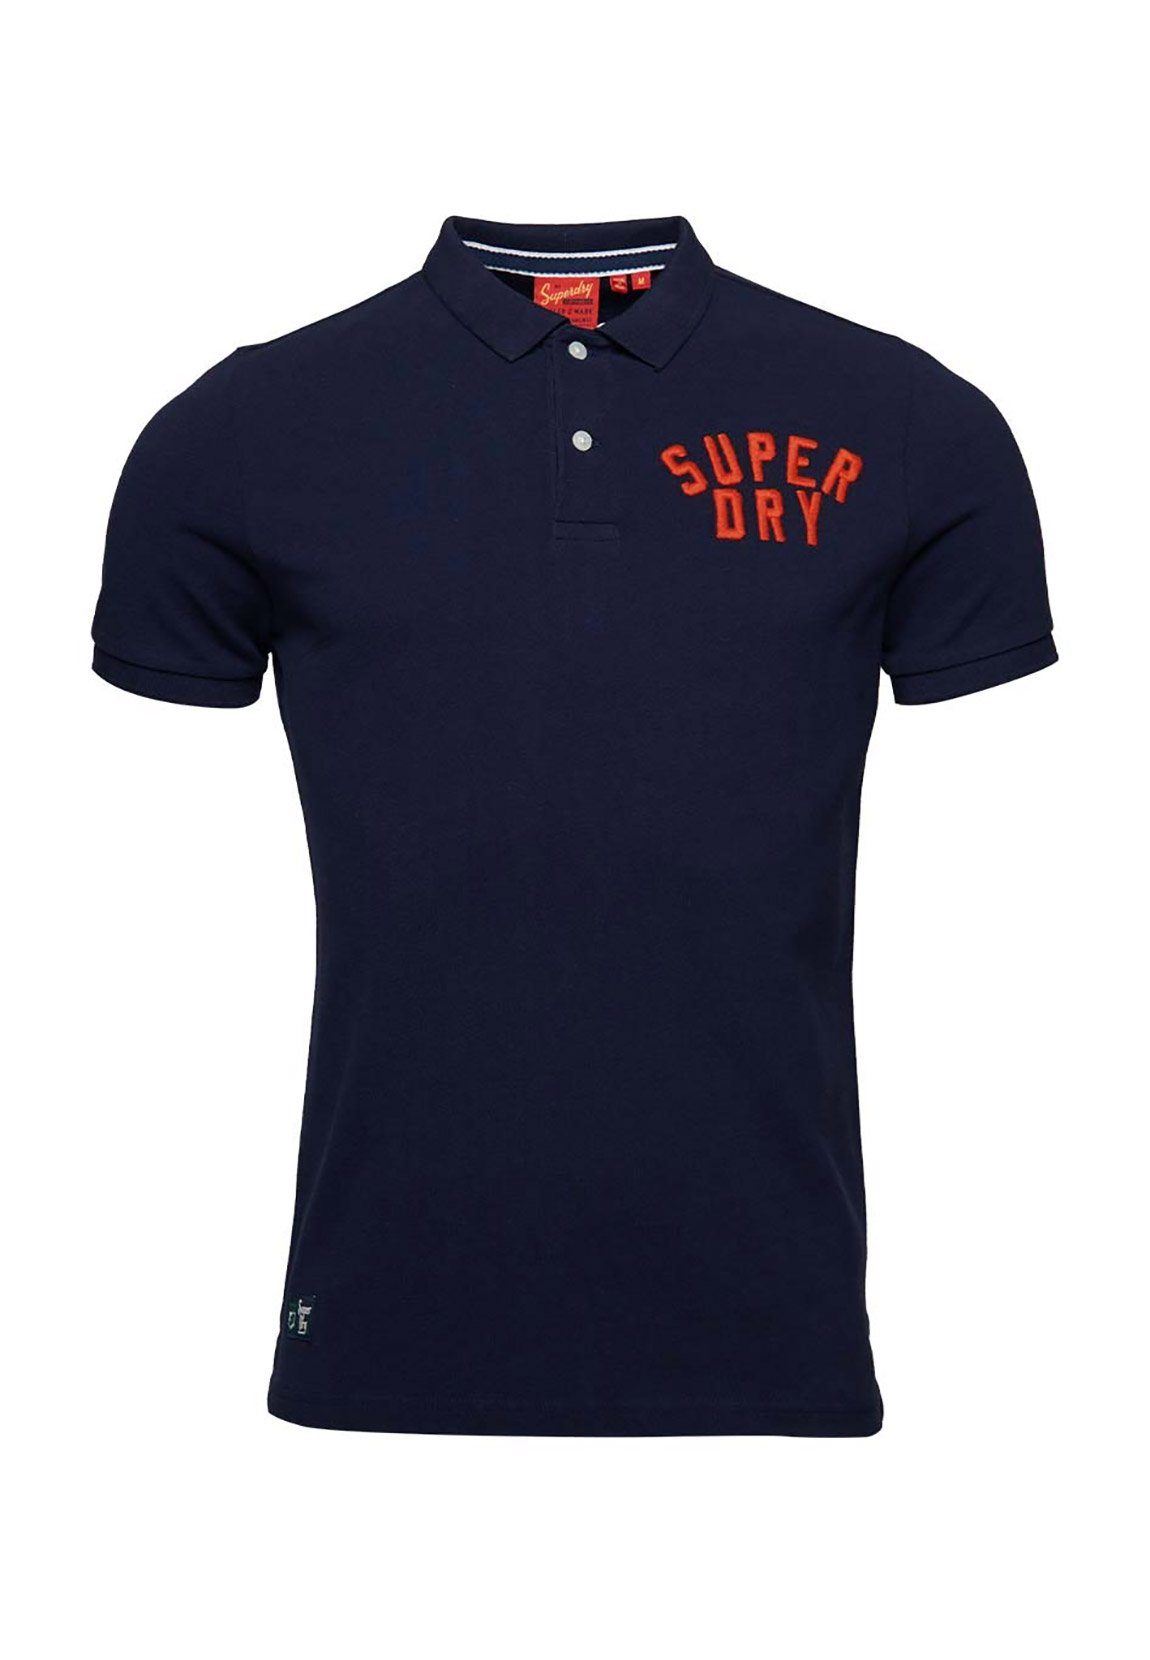 Poloshirt SUPERSTATE VINTAGE Superdry Herren Polo Superdry Eclipse POLO Navy